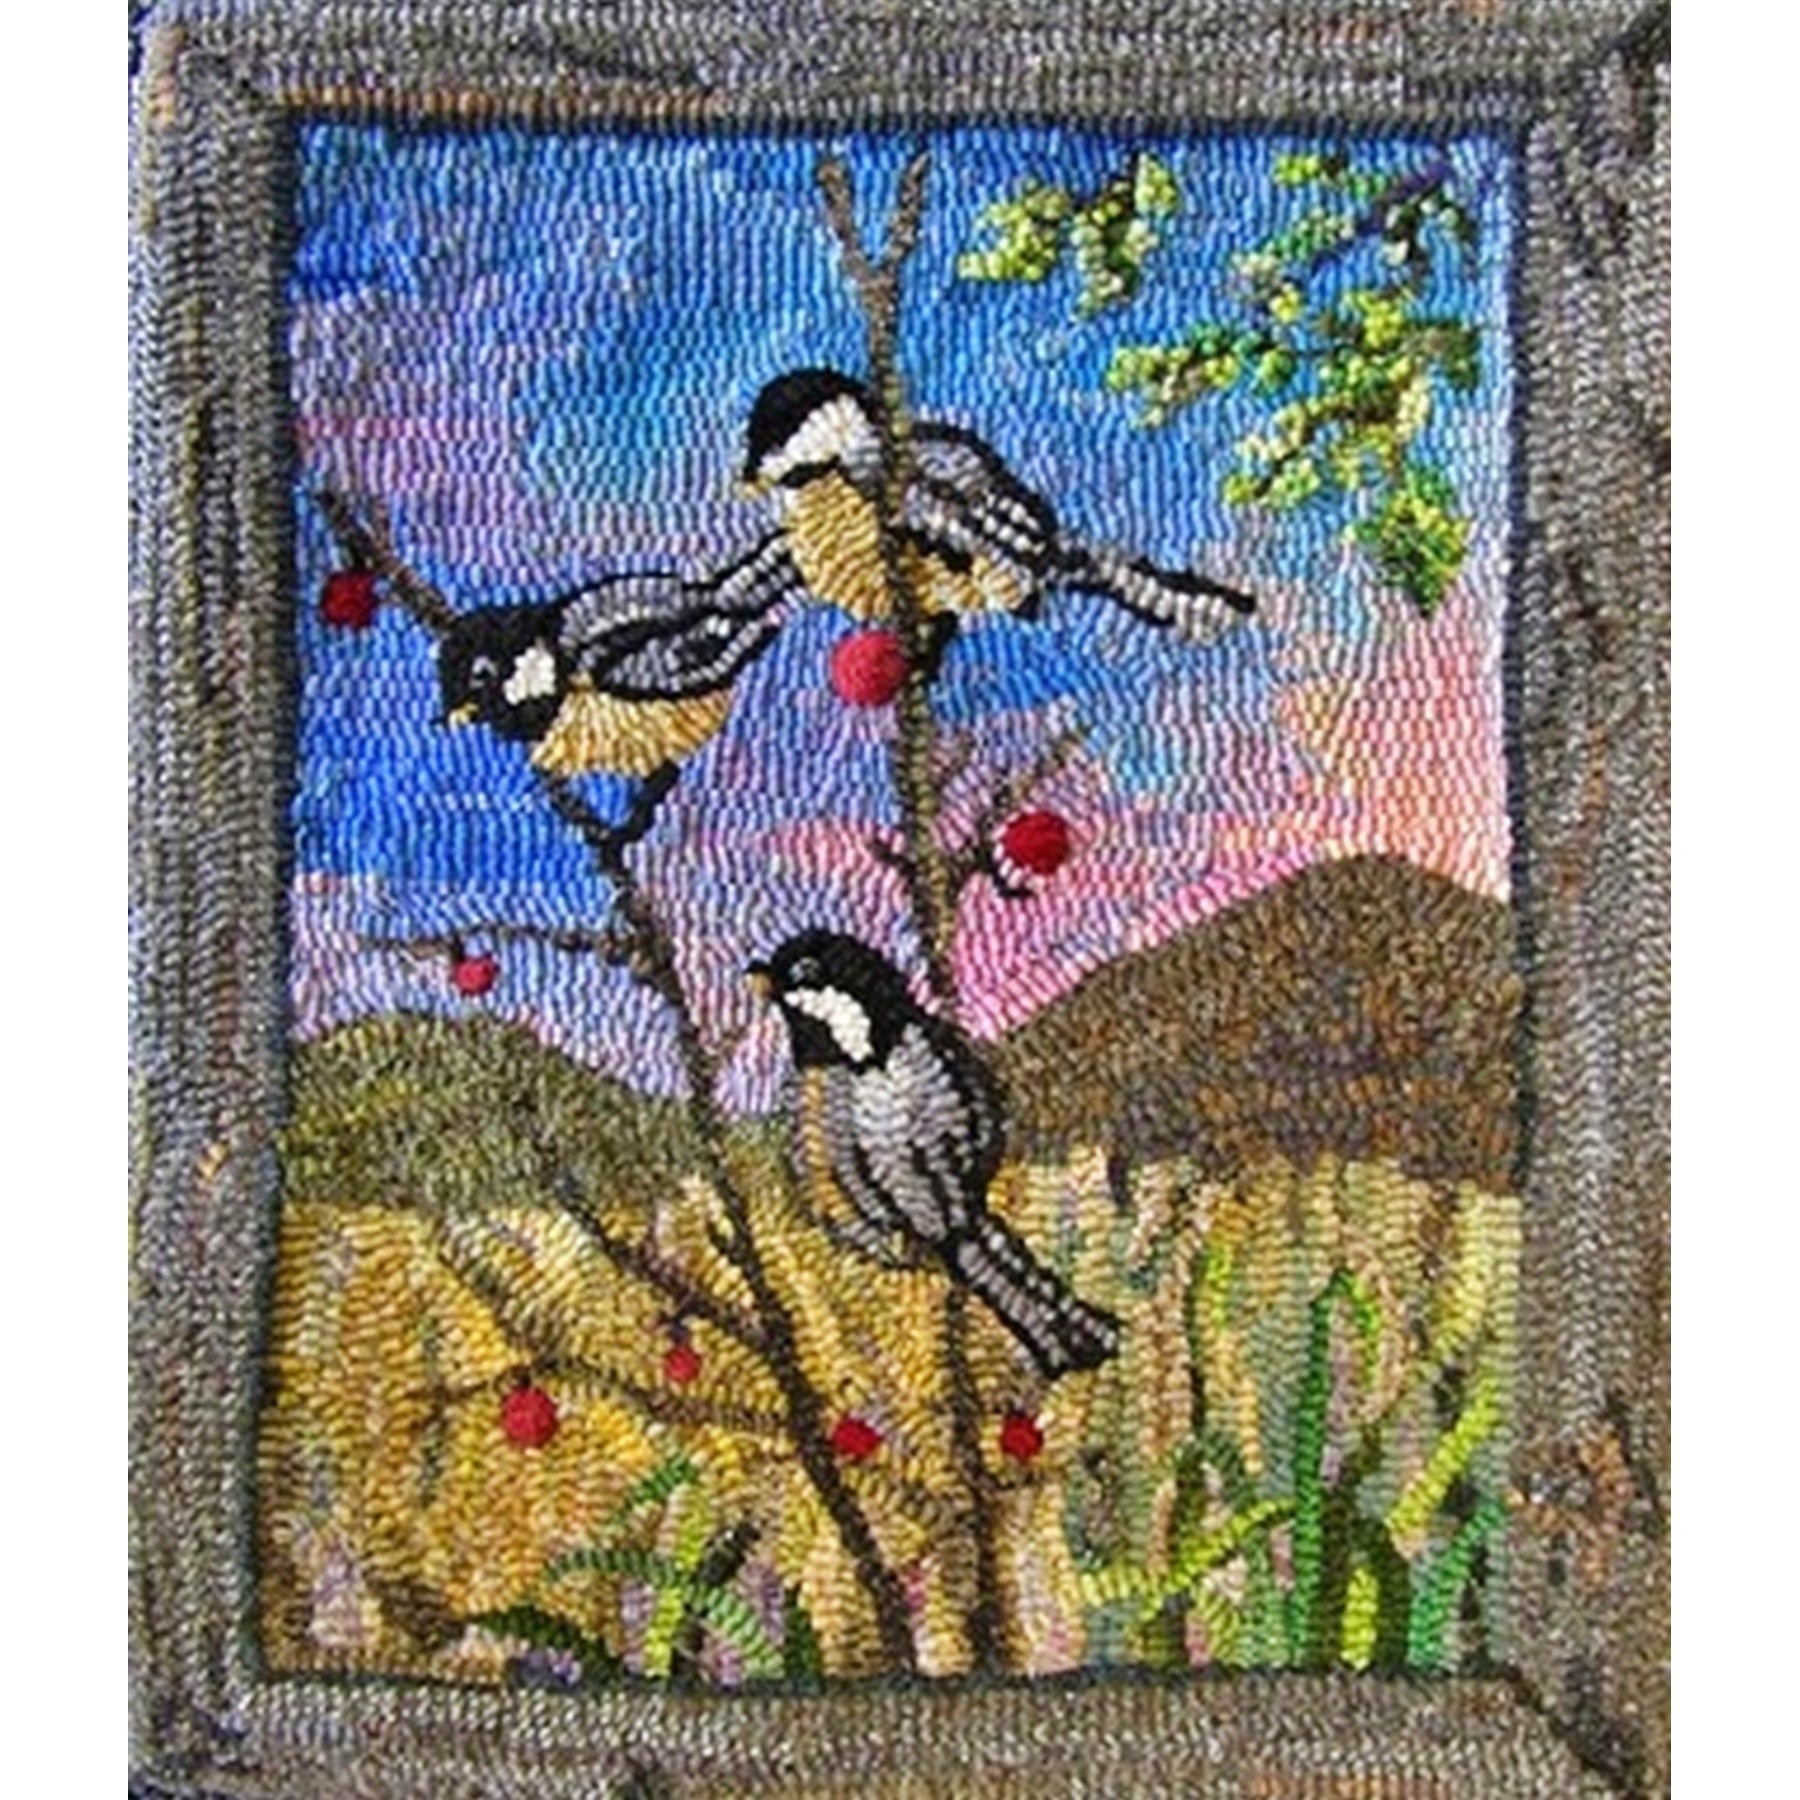 Chickadees, rug hooked by Gail Becker